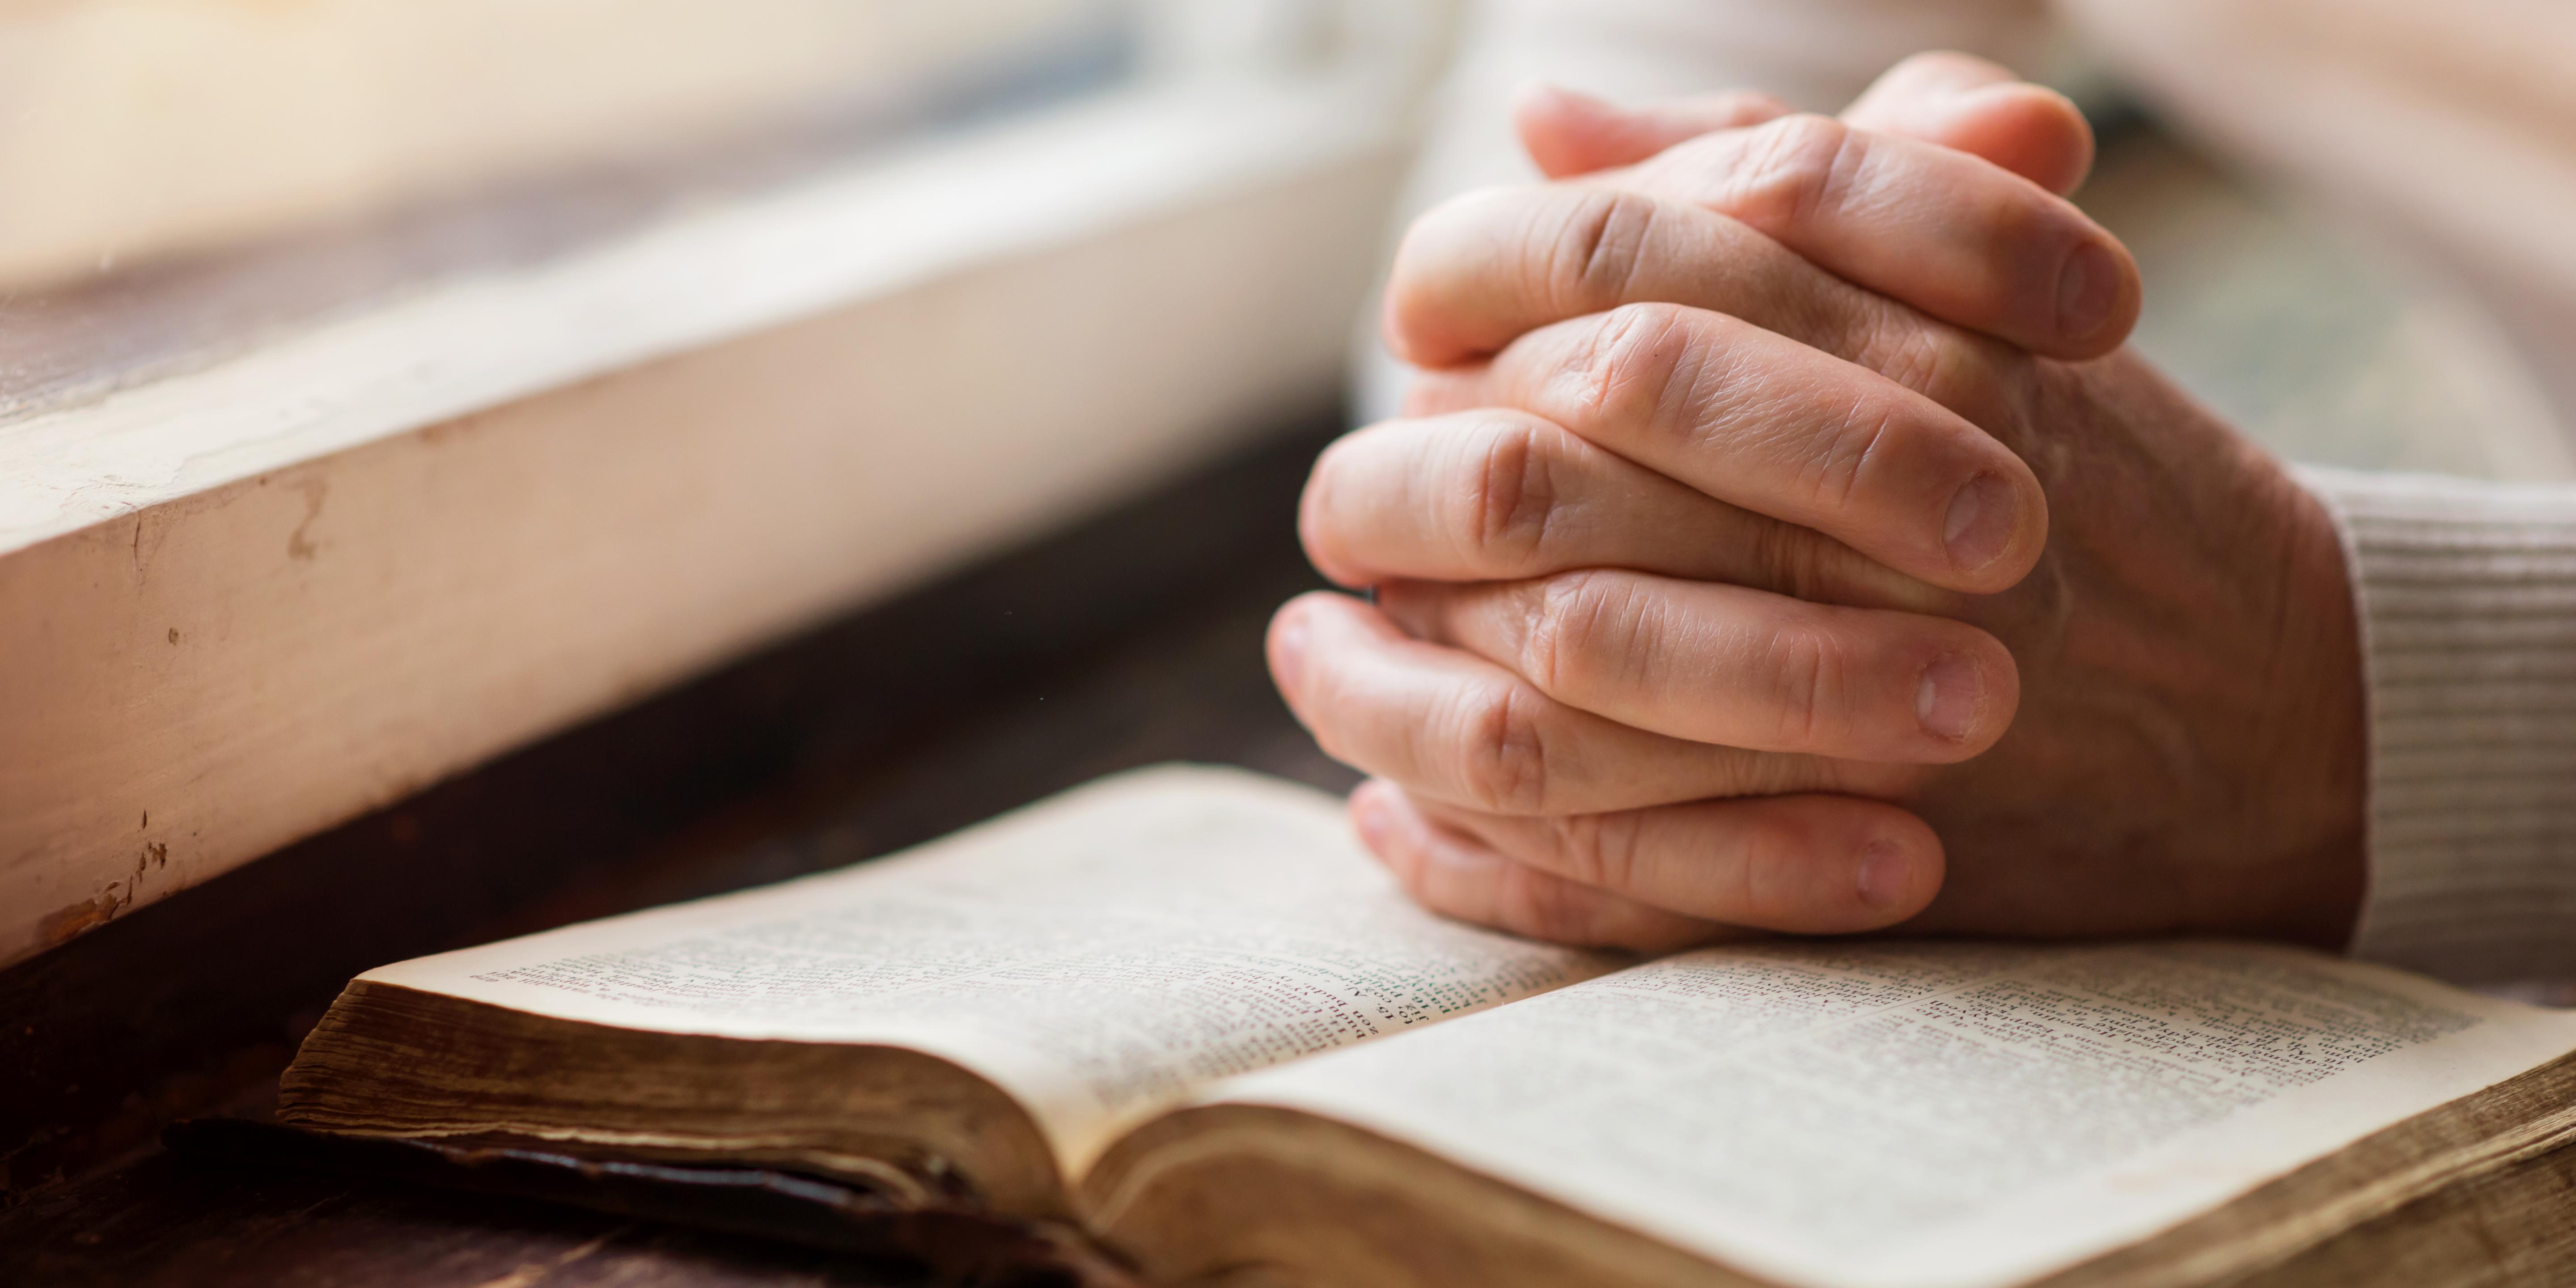 prayer hands with a religious text